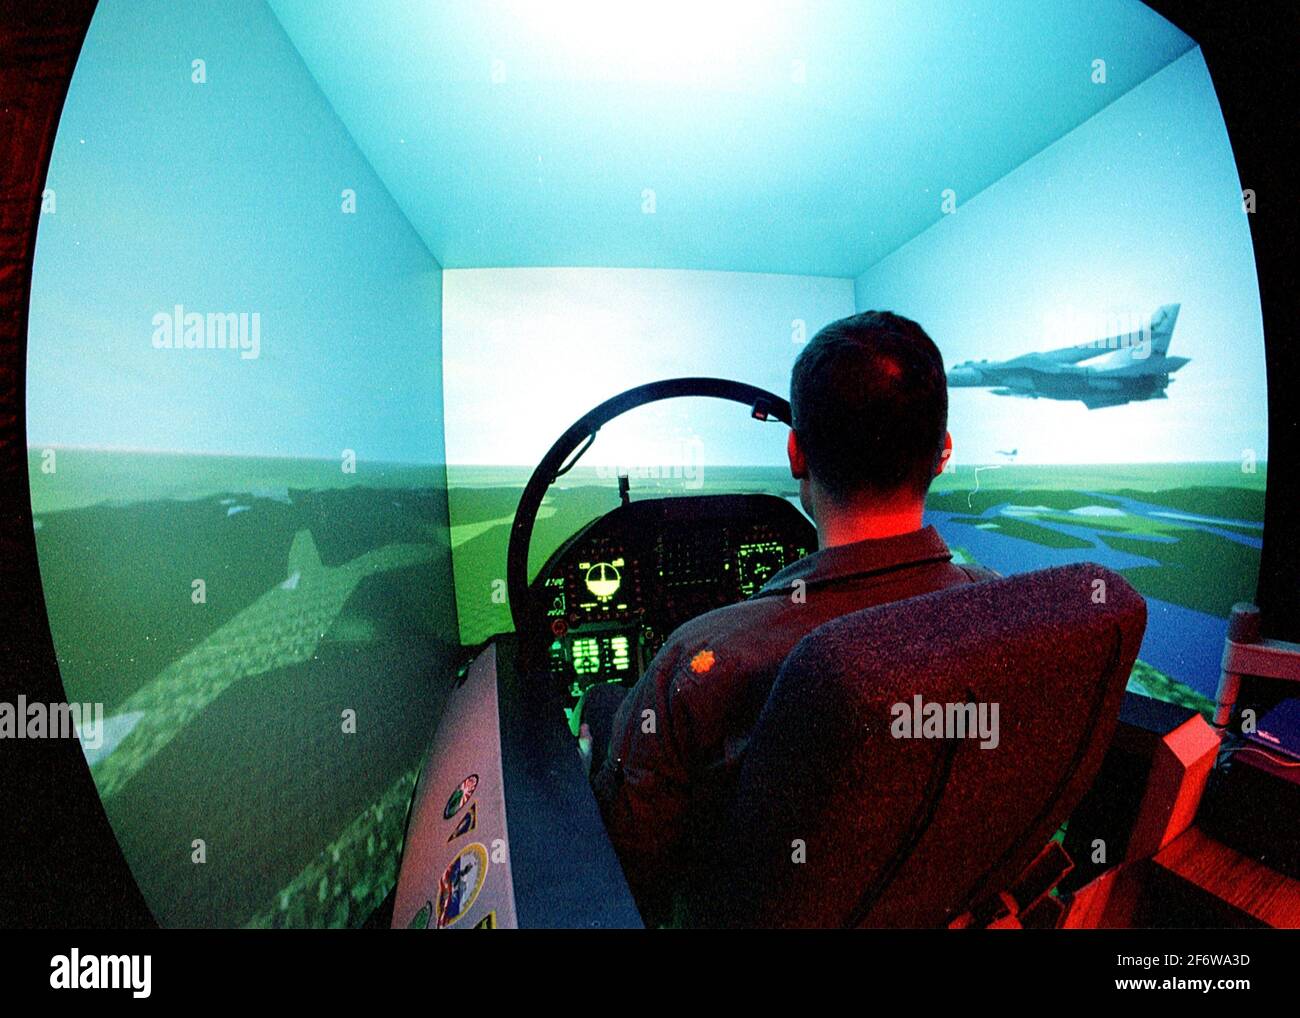 ABOARD USS INDEPENDENCE (Mar. 10, 1998) -- Lt. Cdr. Bryan Kust from Pennington, NJ sits in a F/A-18 Hornet flight simulator aboard the aircraft Stock Photo